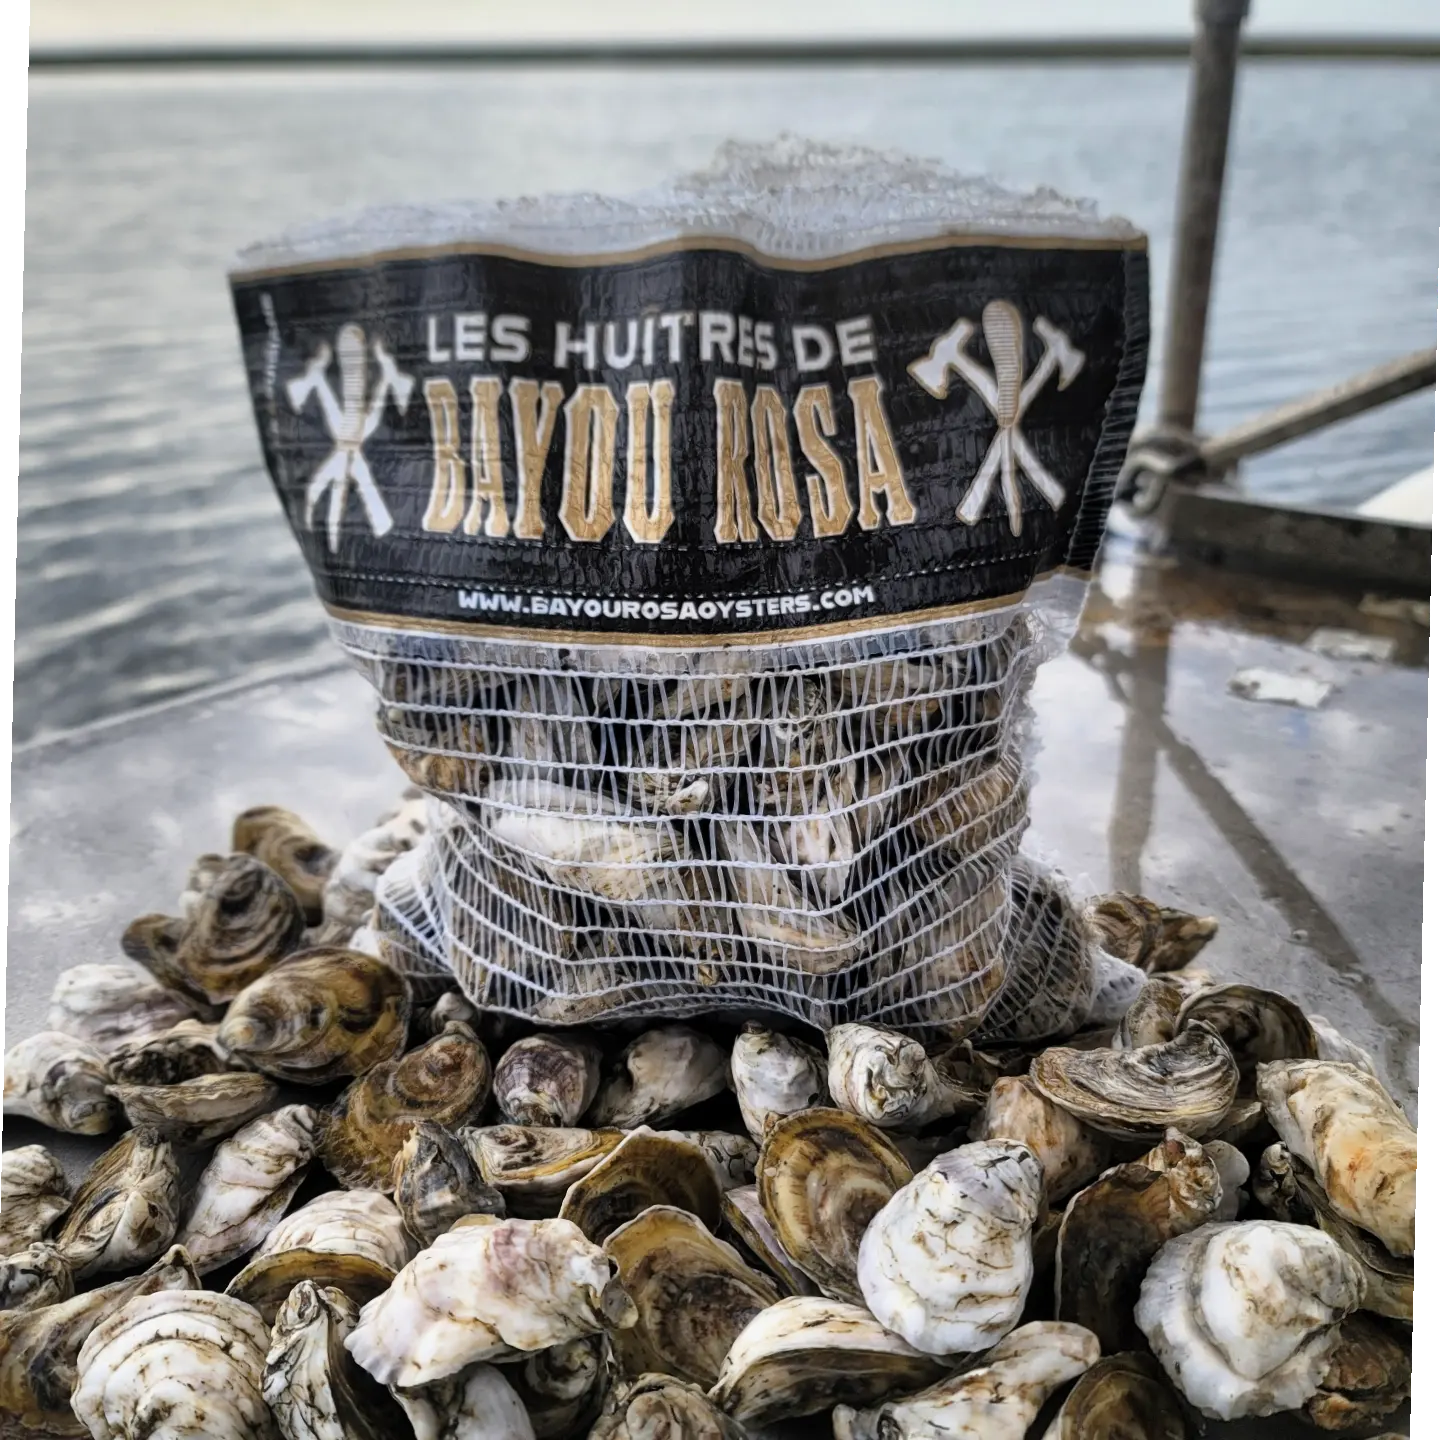 Oysters DELIVERED May 23rd to New Orleans Area (See PARISHES in Description) or Pickup in Raceland, LA